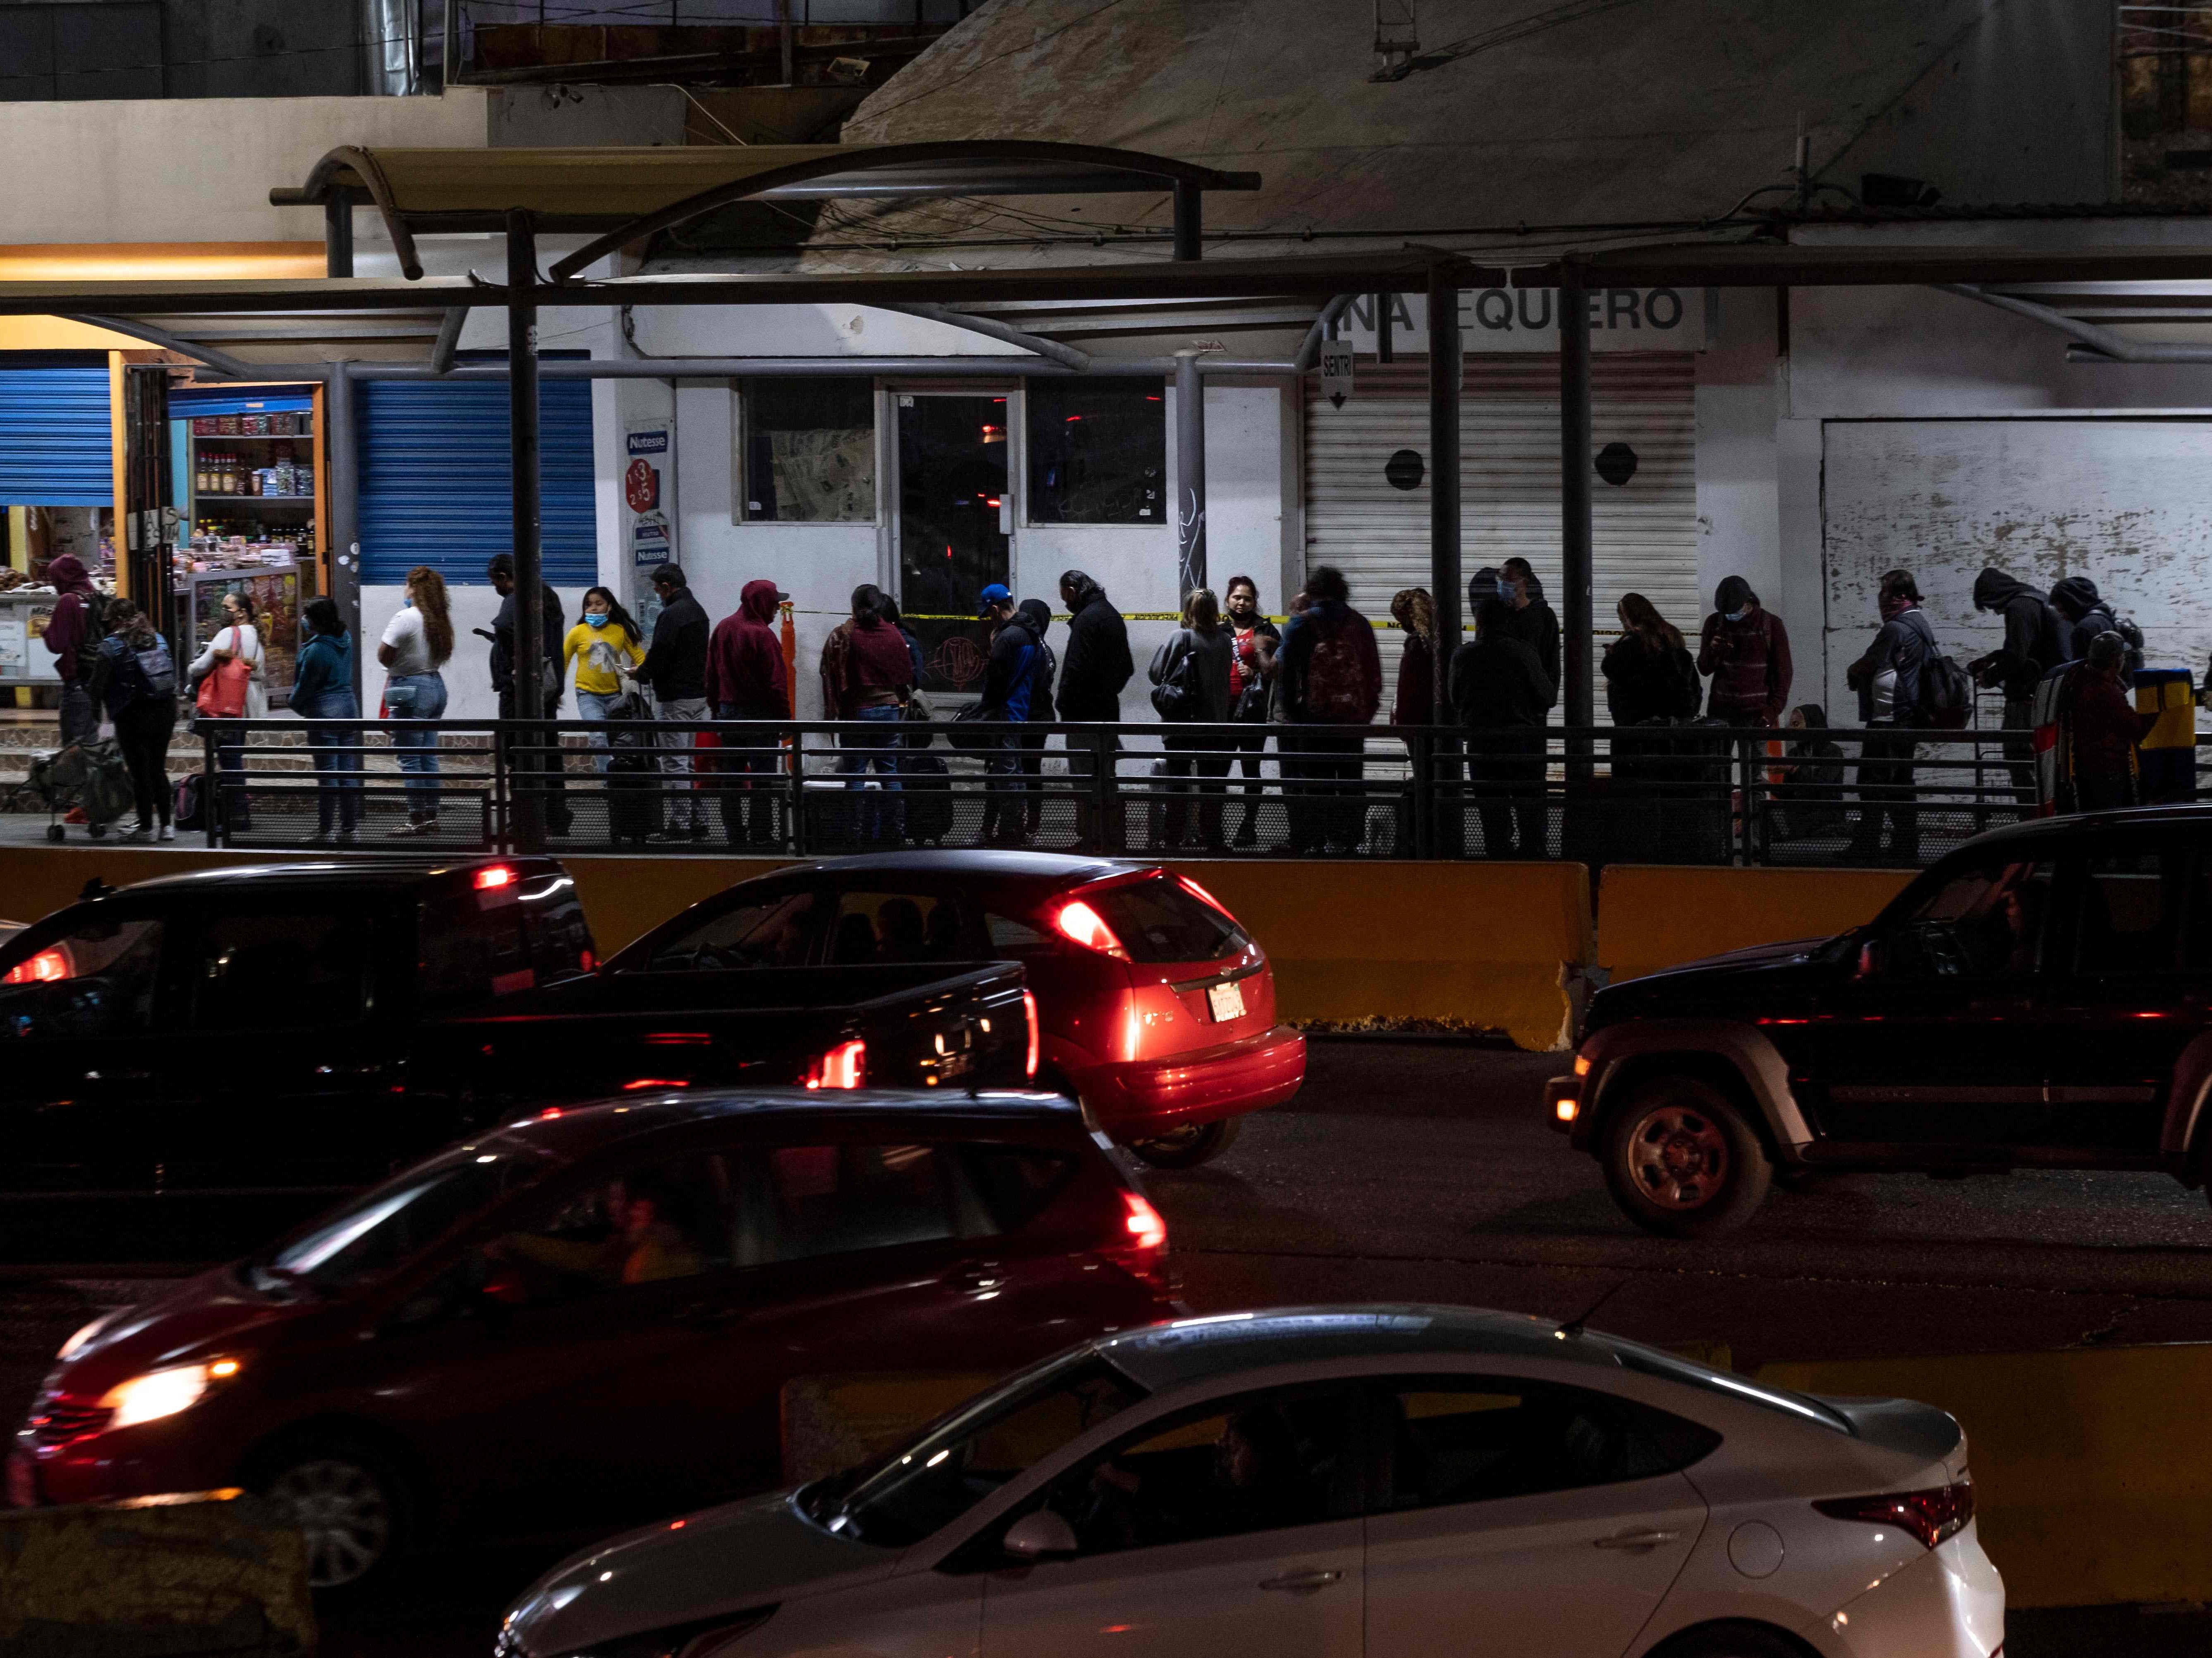 Pedestrians were also waiting for enter the US from Tijuana, Mexico.